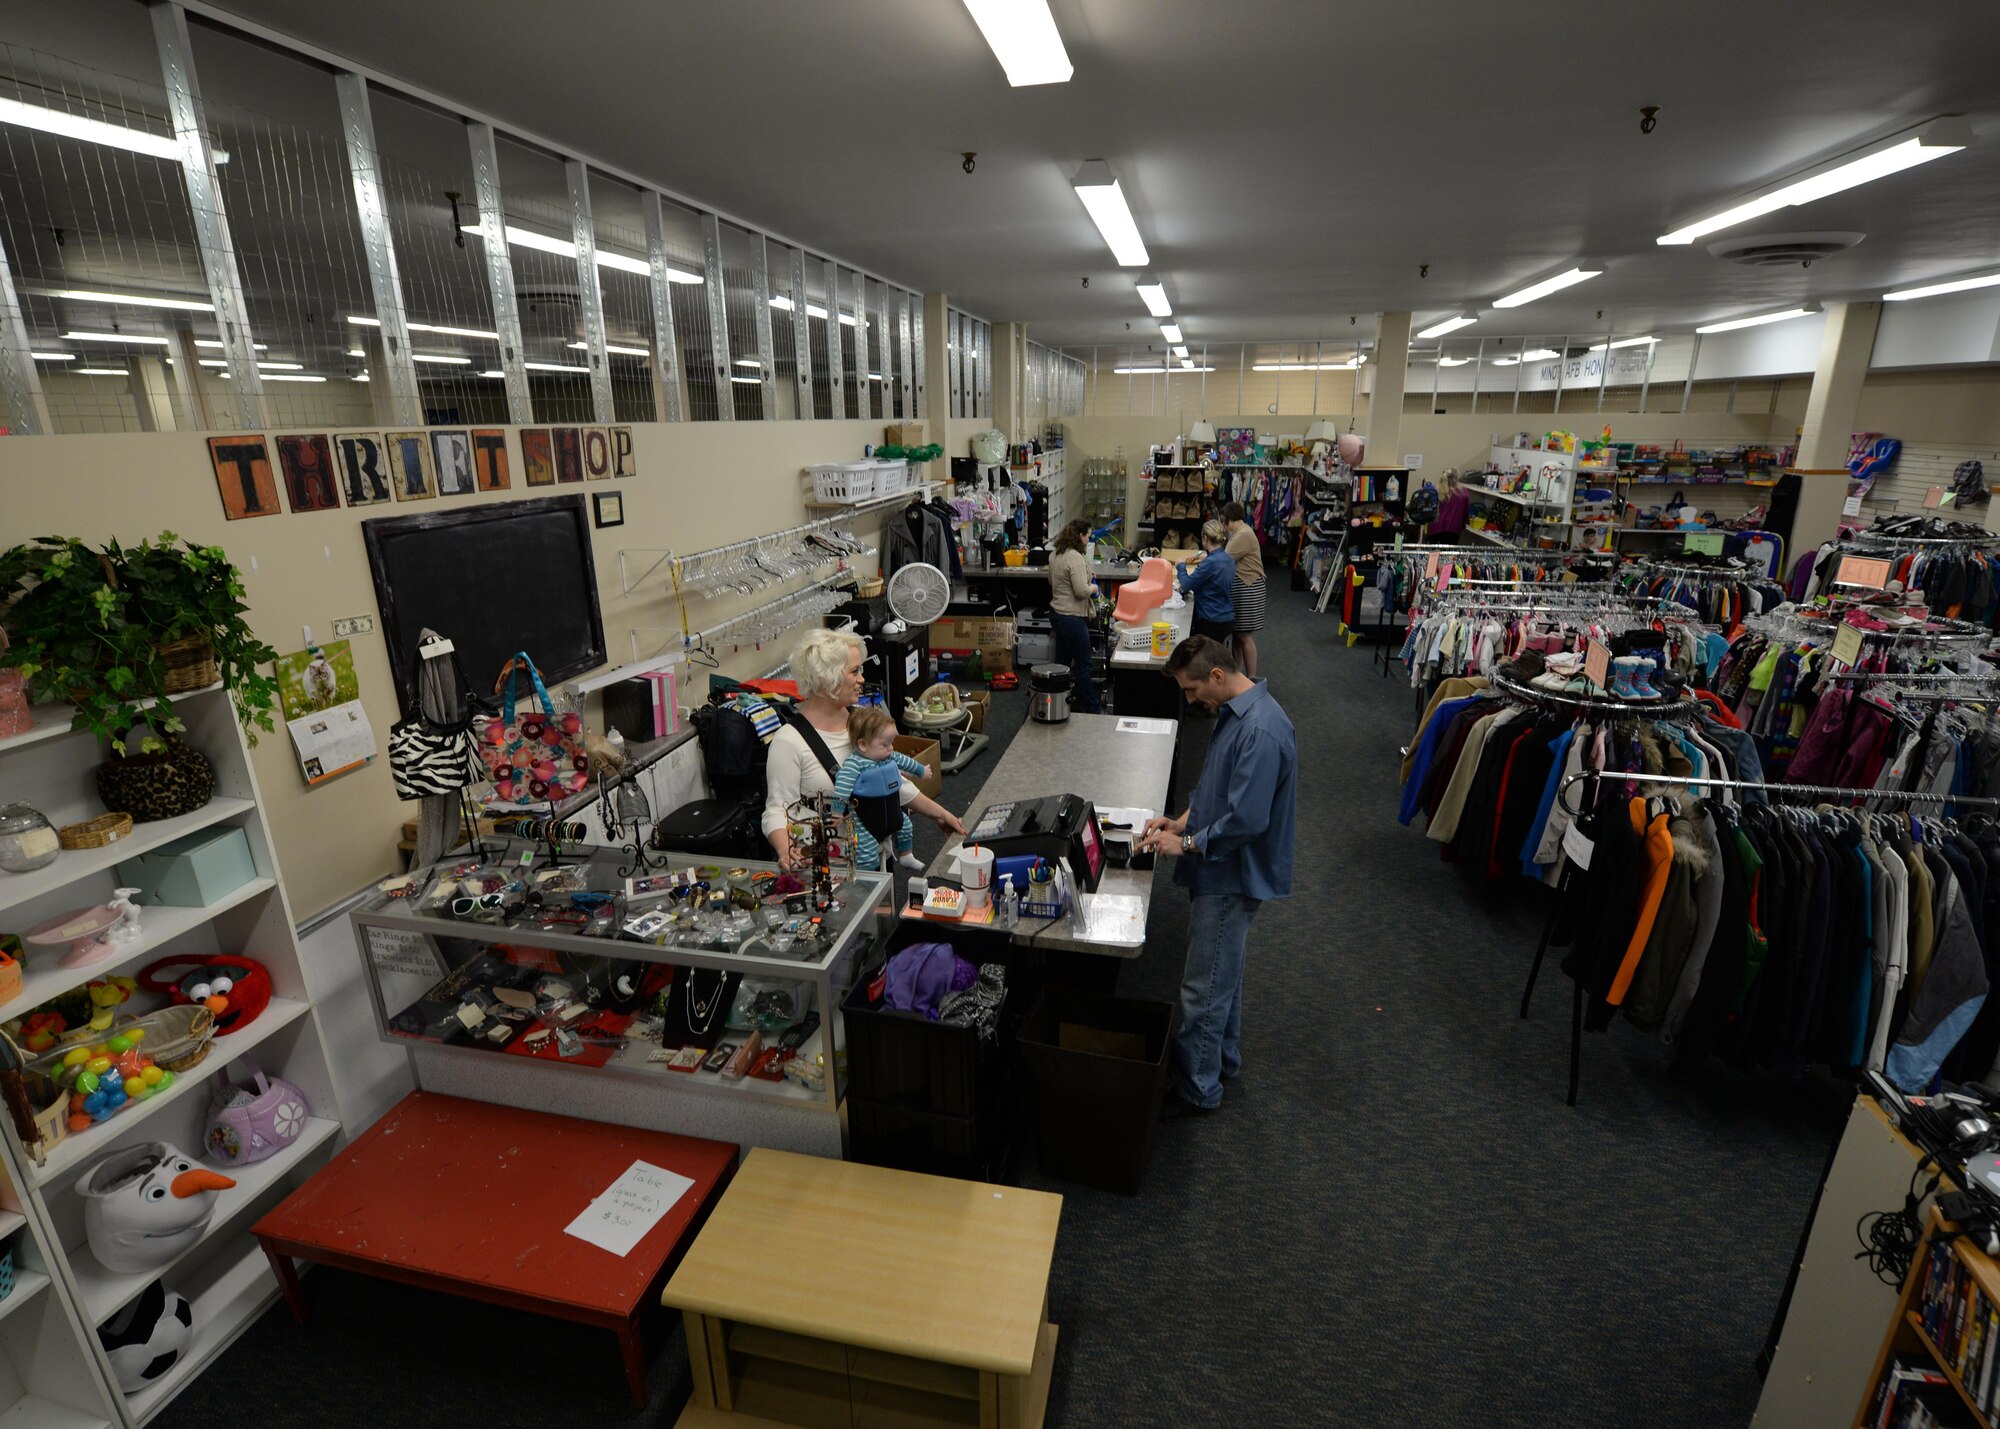 Thrift shop volunteers assist customers at Minot Air Force Base, N.D., April 7, 2017.  All profits made at the thrift shop go to multiple charities that help the community. (U.S. Air Force photo/ Airman 1st Class Dillon J. Audit)